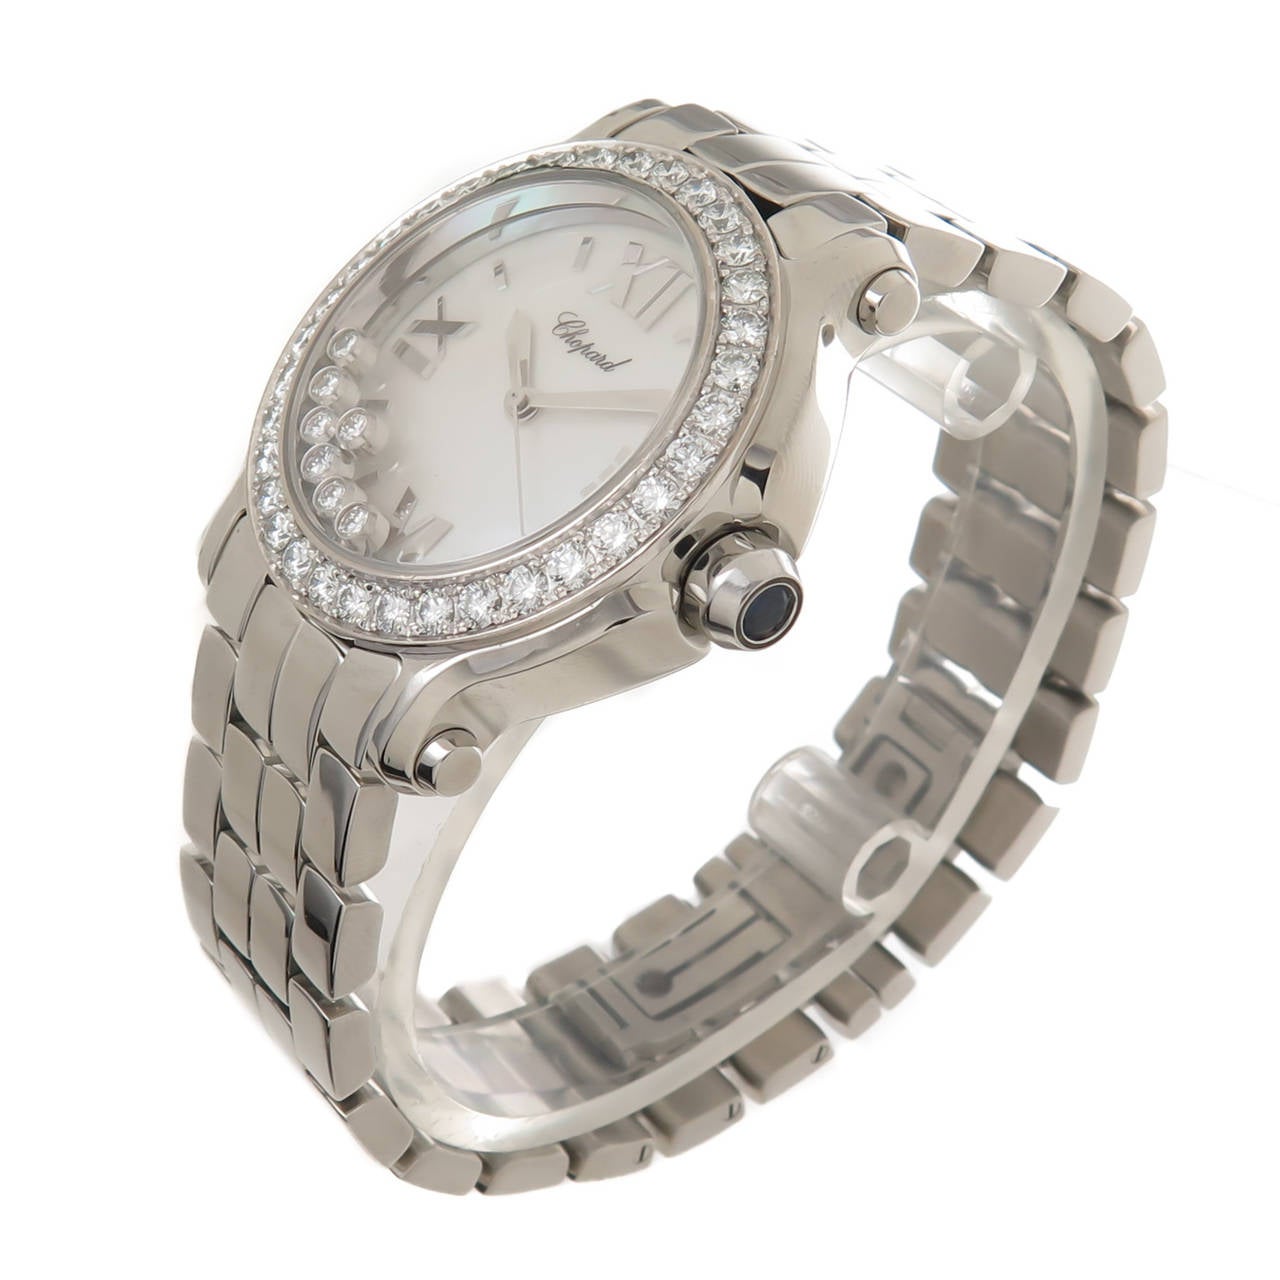 Circa 2005 Chopard Happy Sport Stainless Steel and 7 floating Diamond  Diamond Mid Size Wrist watch, 36MM water proof case with Round Brilliant cut Diamond bezel, Diamonds totaling 1.50 Carat. Sapphire set Crown, Mother of Pearl Dial with raised